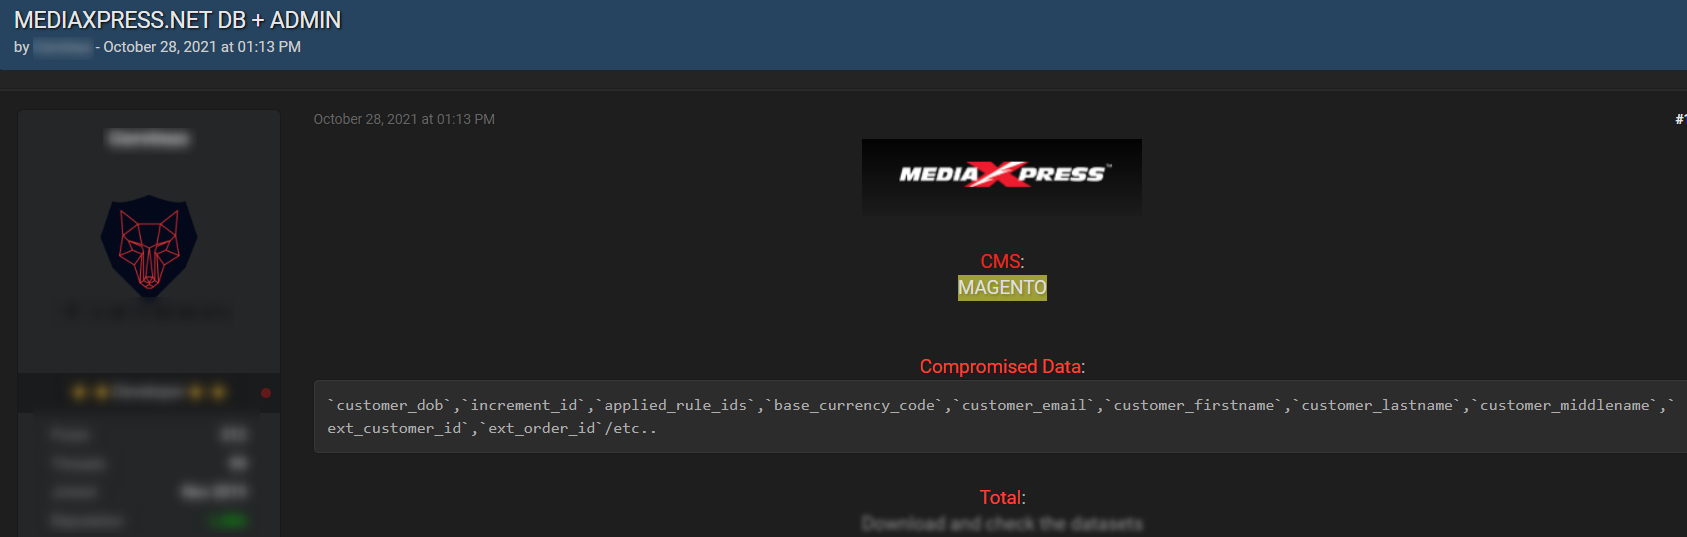 A post listing customer emails, names and user ID retrieved from mediaxpress.net, one of the hundreds of domains that were breached